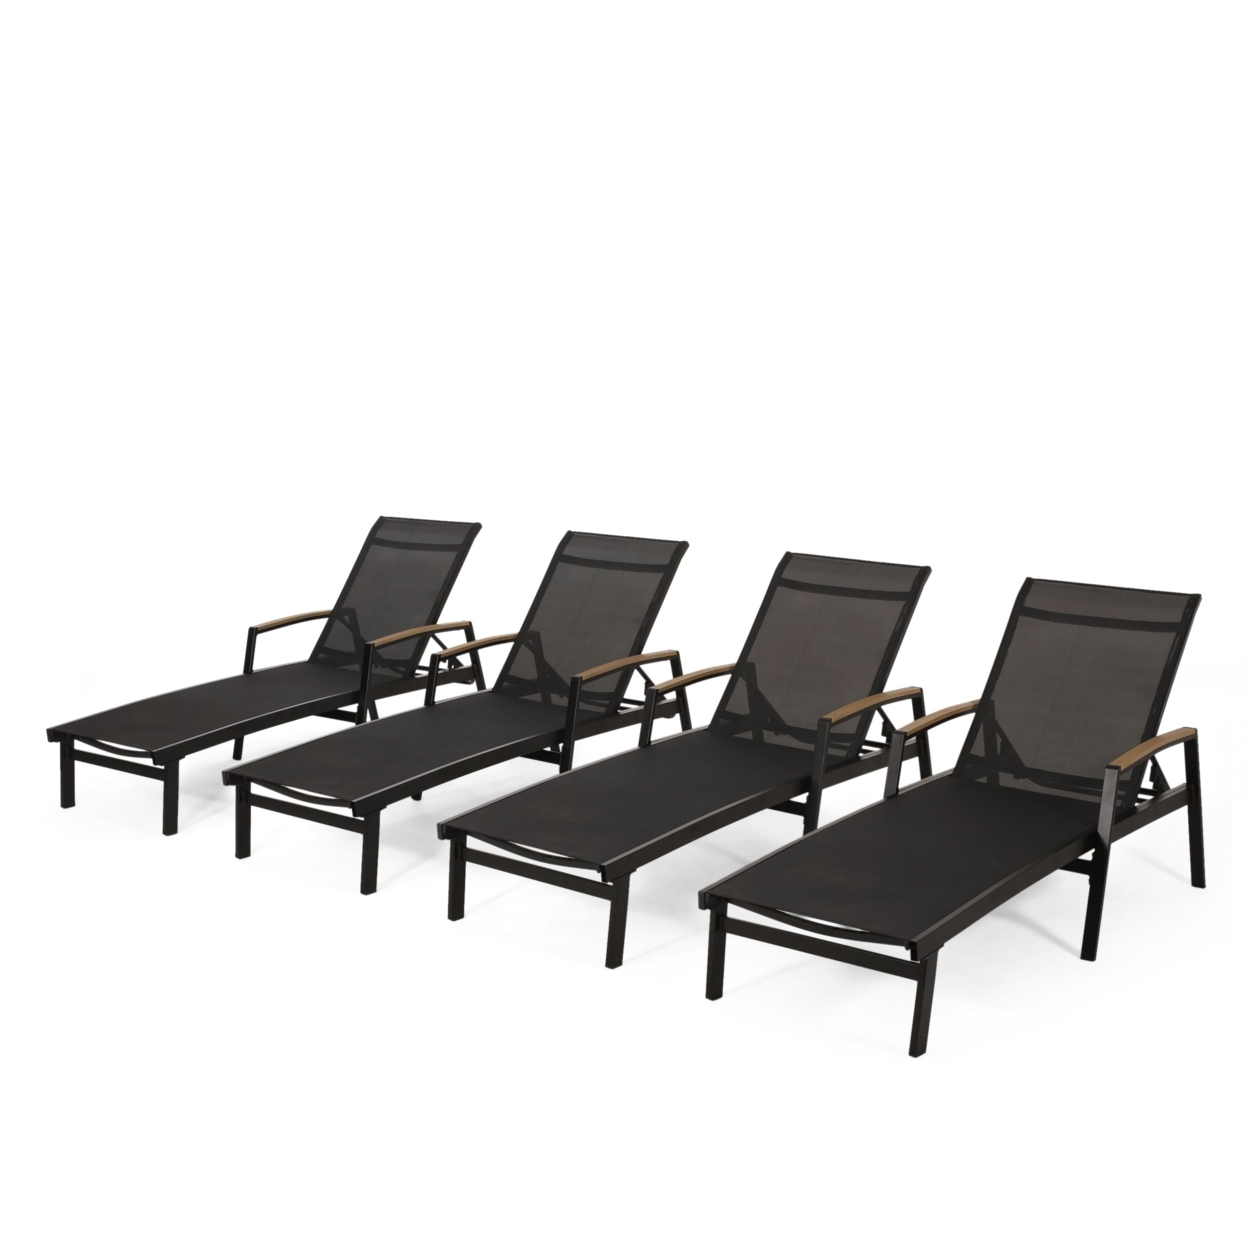 Joy Outdoor Aluminum Chaise Lounge With Mesh Seating (Set Of 4) - Black